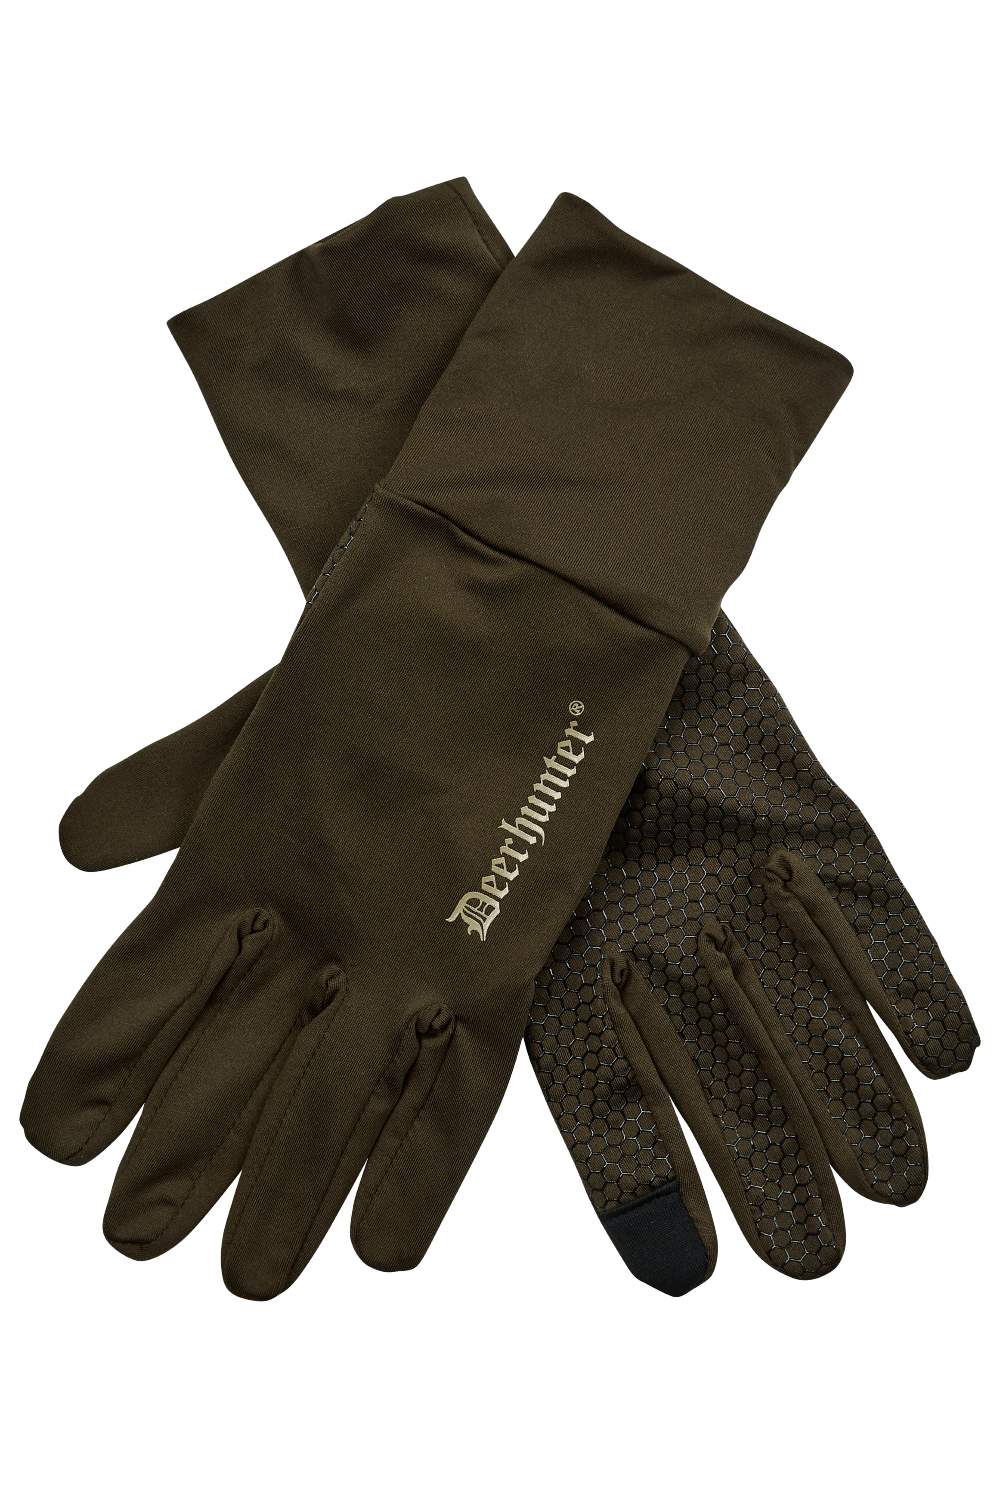 Deerhunter Escape Gloves With Silicone Grip in Art Green 